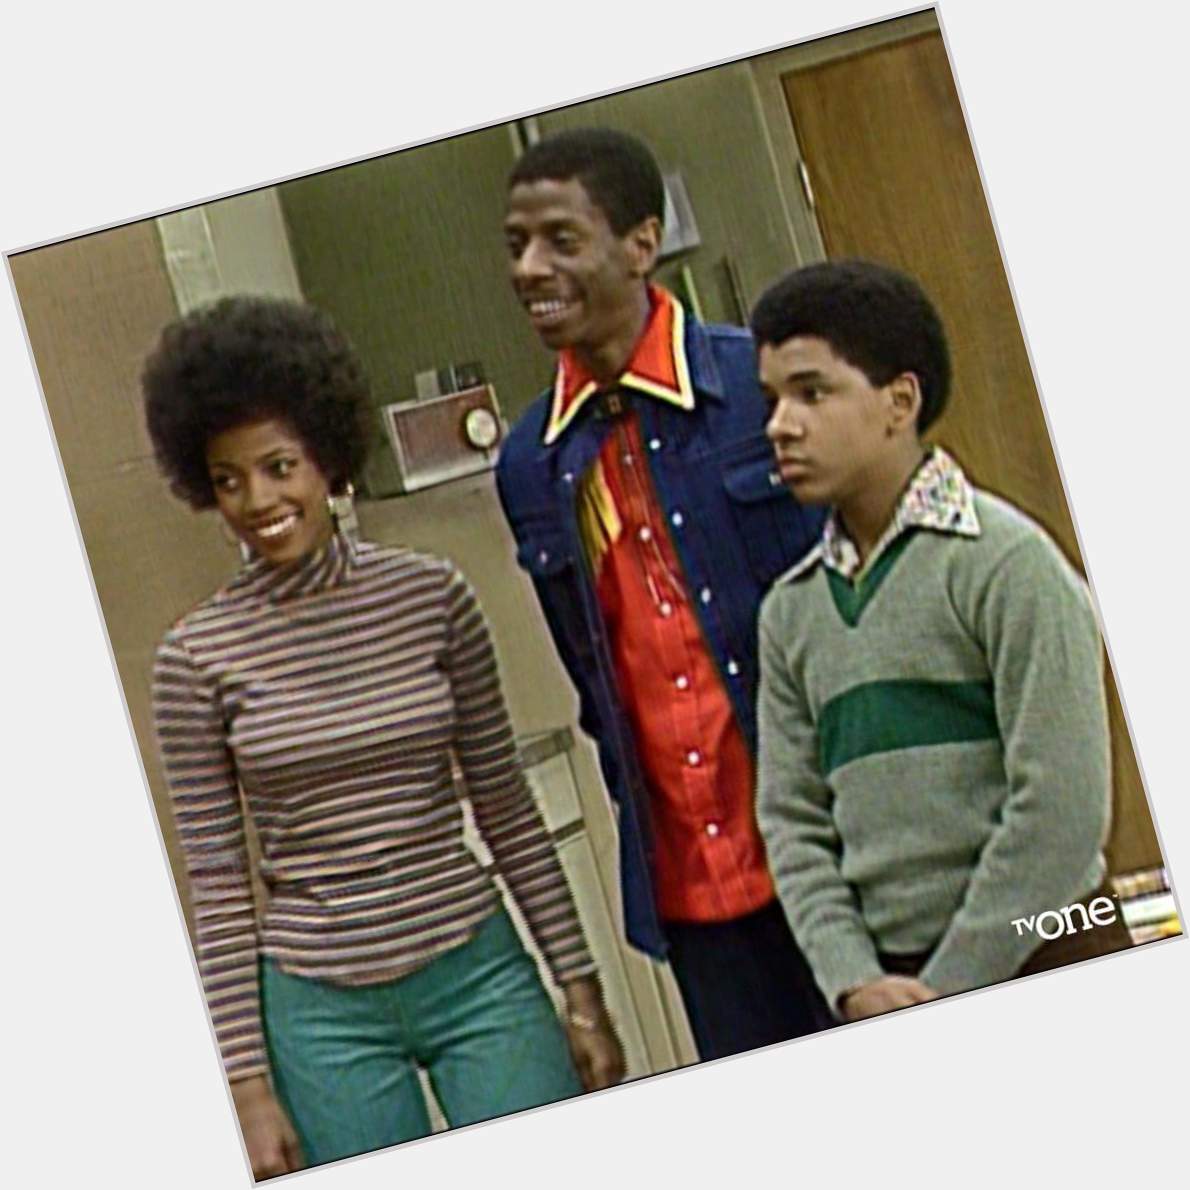 Happy birthday Ralph Carter, a.k.a Michael Evans from good times 